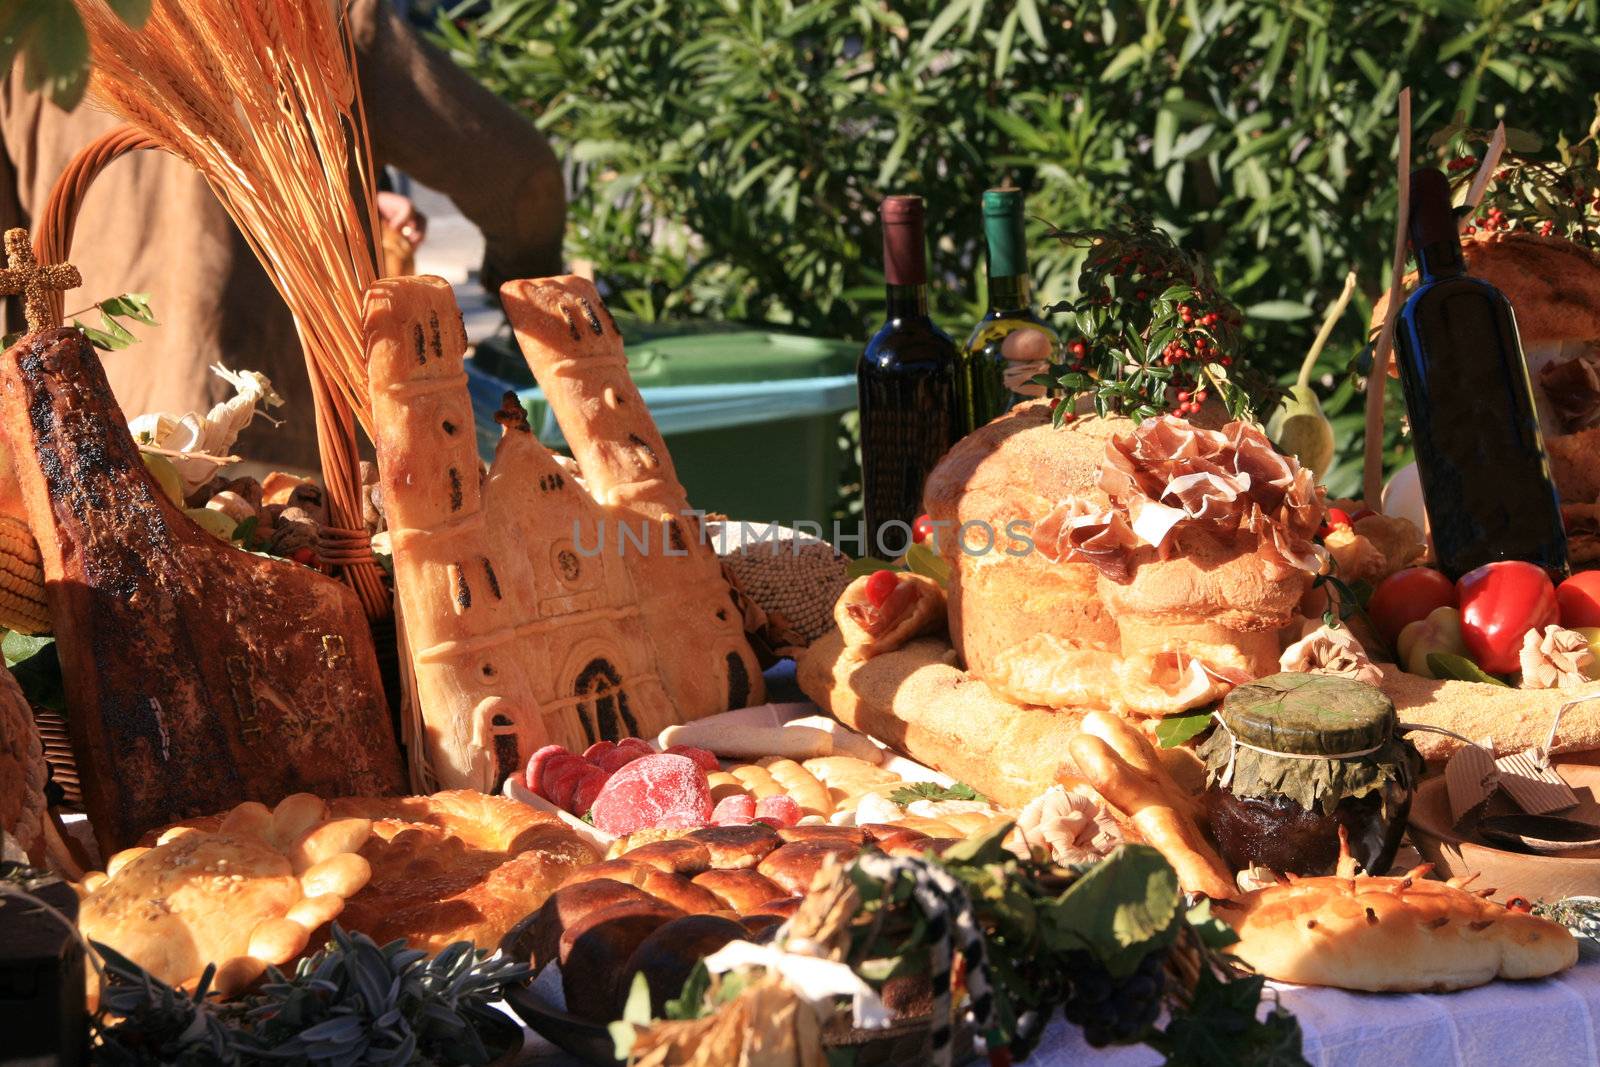 Market stall at the Harvest Festival in Mali Losinj by STphotography